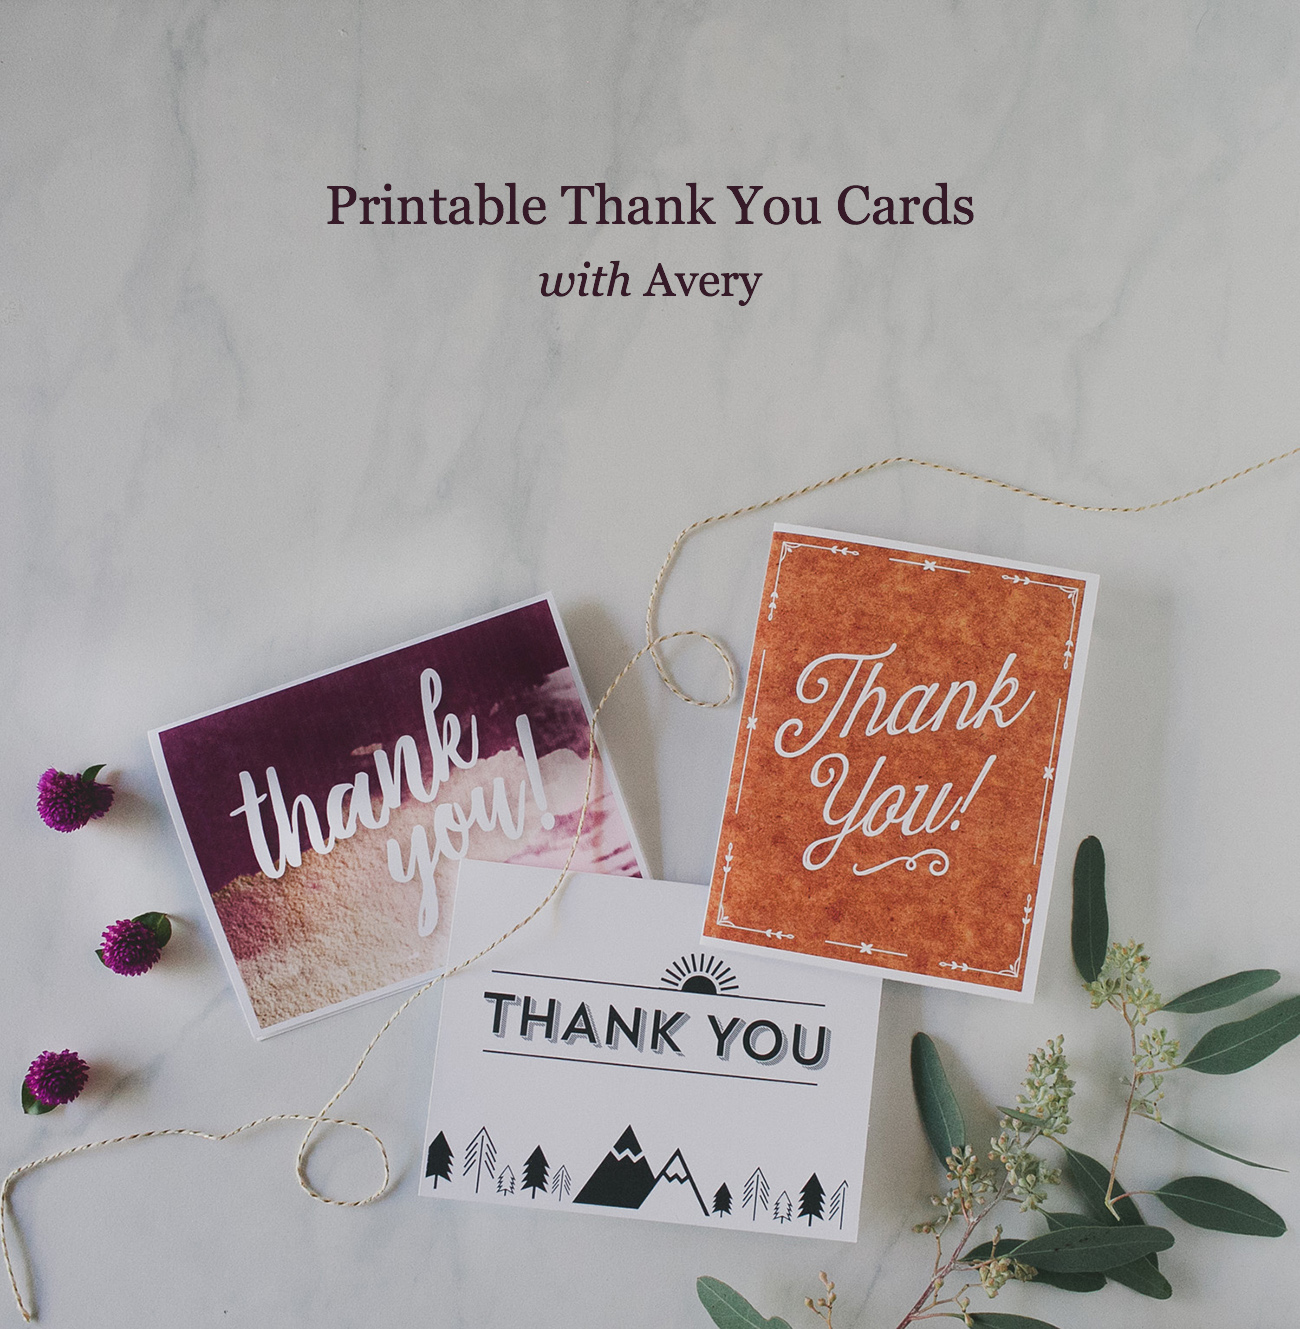 Printable Thank You Cards for your wedding 